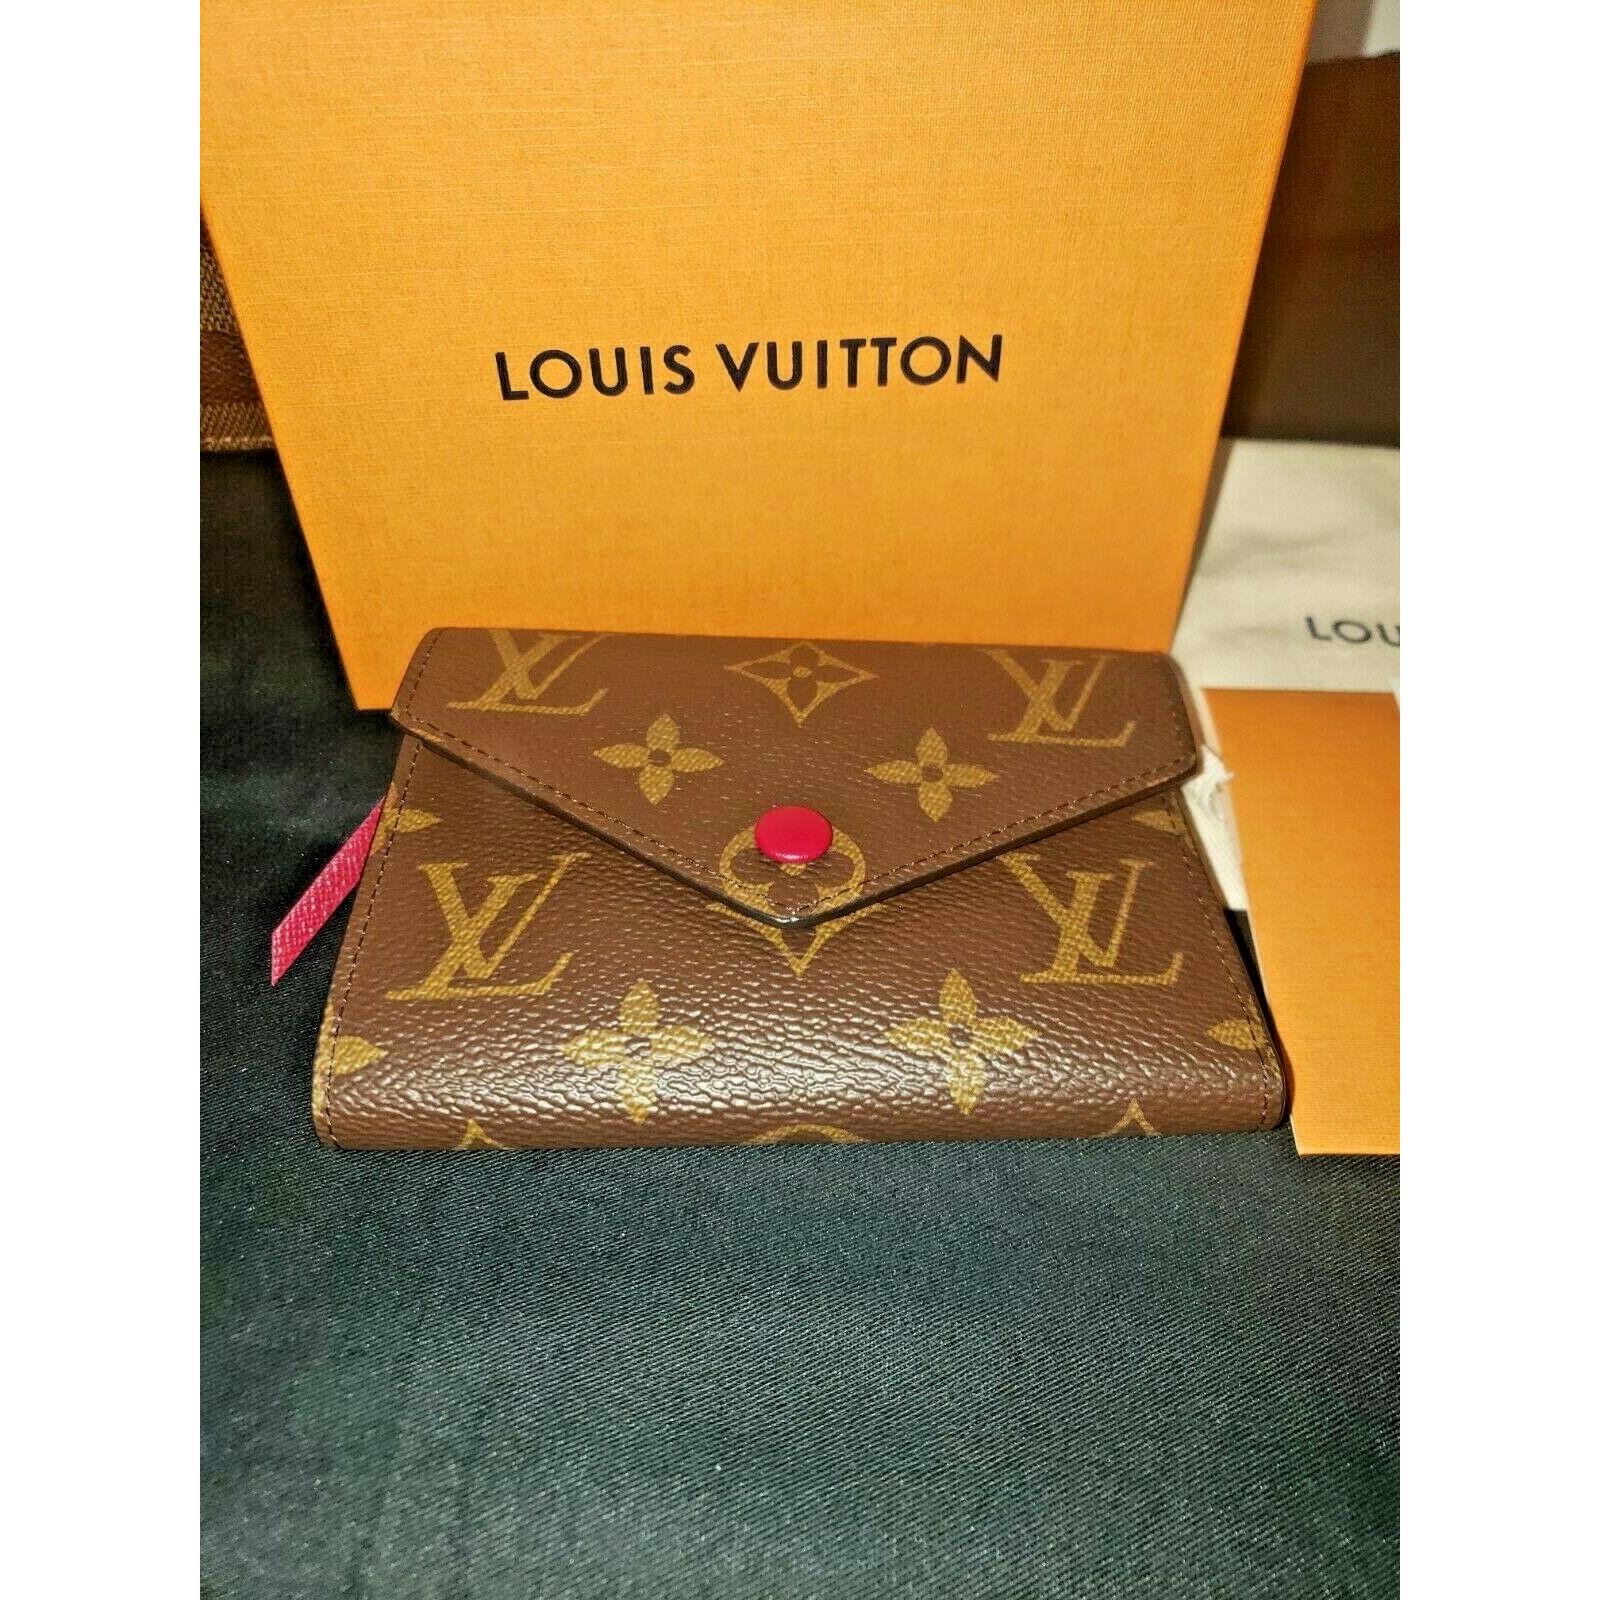 where to find the date code on louis vuitton wallet